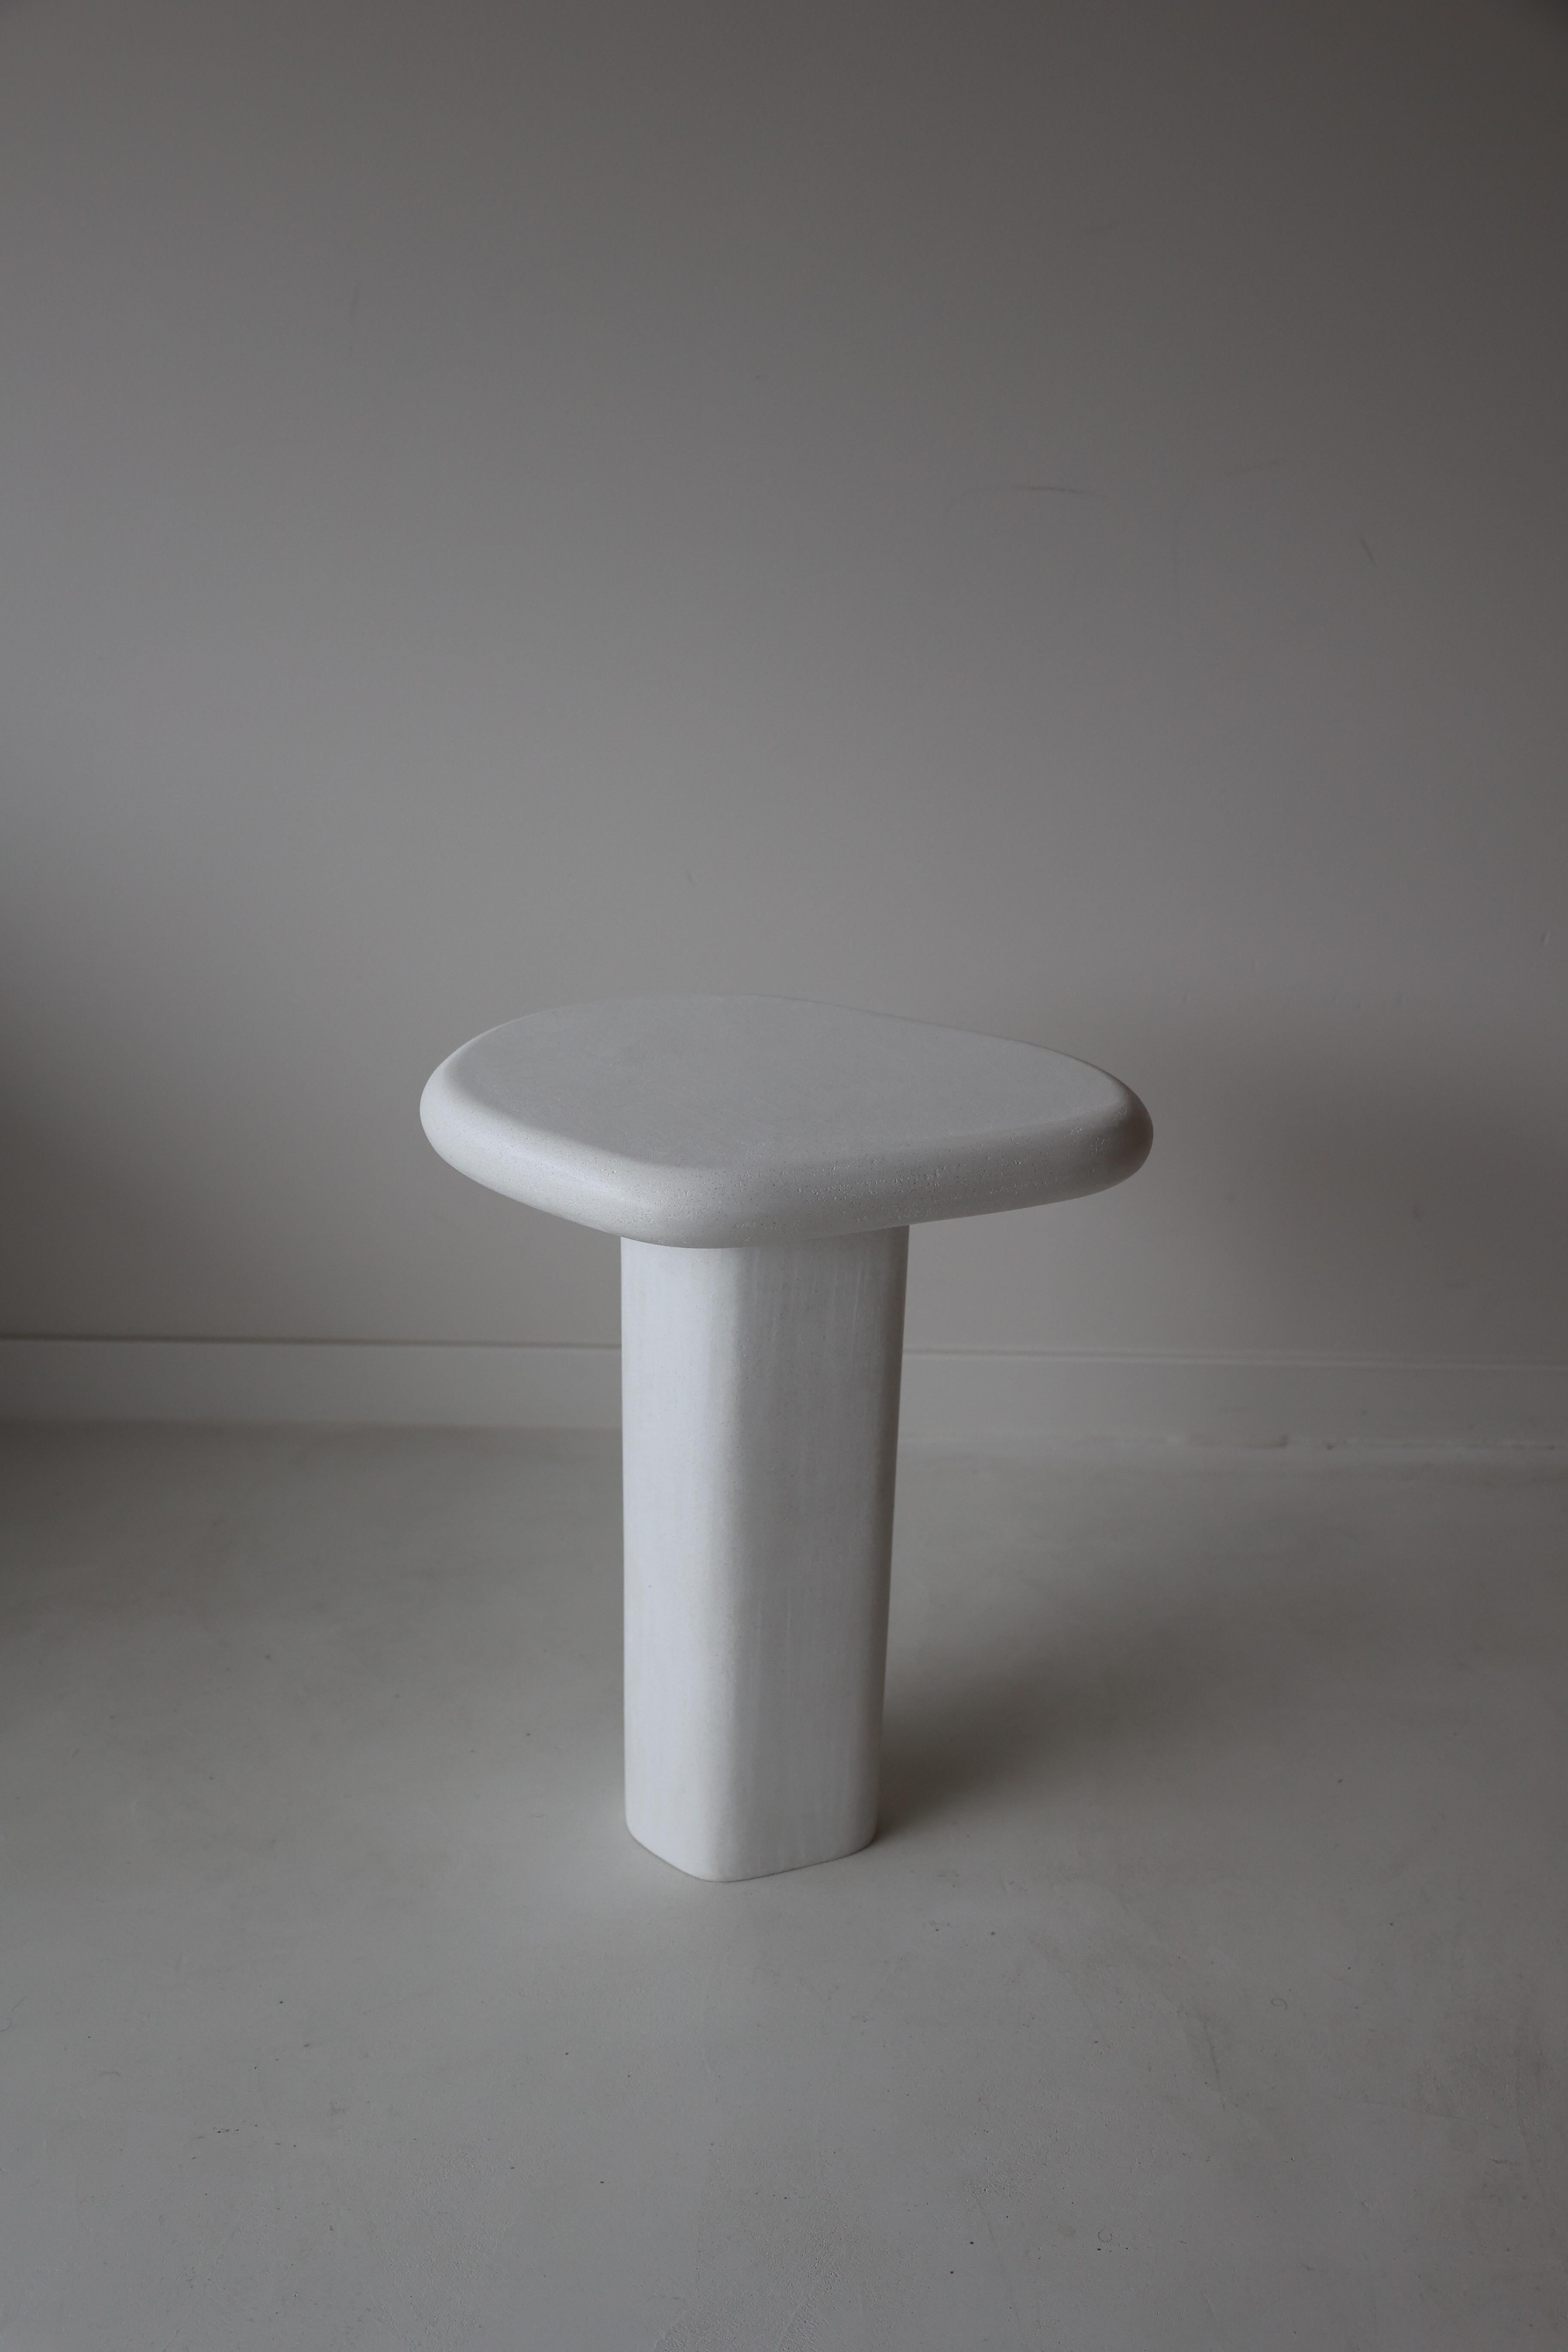 Aya Side Table by Kasanai
Dimensions: D 25 x W 26 x H 45 cm.
Materials: Lime plaster.
Also available in different colors. Please contact us.

Aya is a small but perfectly formed side table which comes as an individual piece or in a nest. Finished